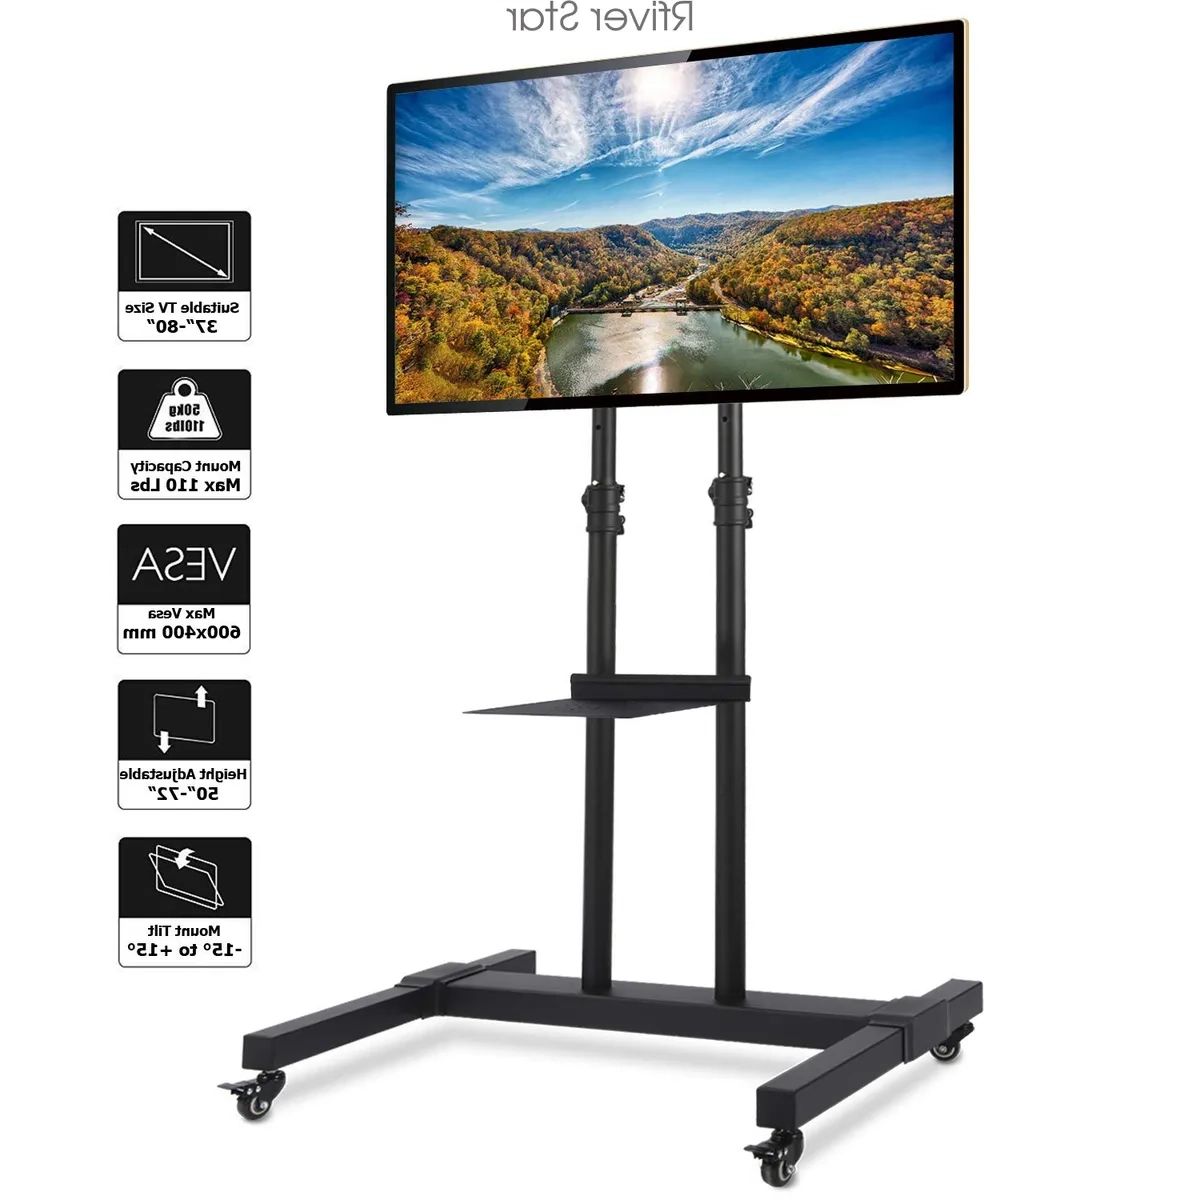 Modern Mobile Rolling Tv Stand For 37" 80" Flat Screen/curved Tvs | Ebay Throughout Modern Rolling Tv Stands (View 18 of 20)